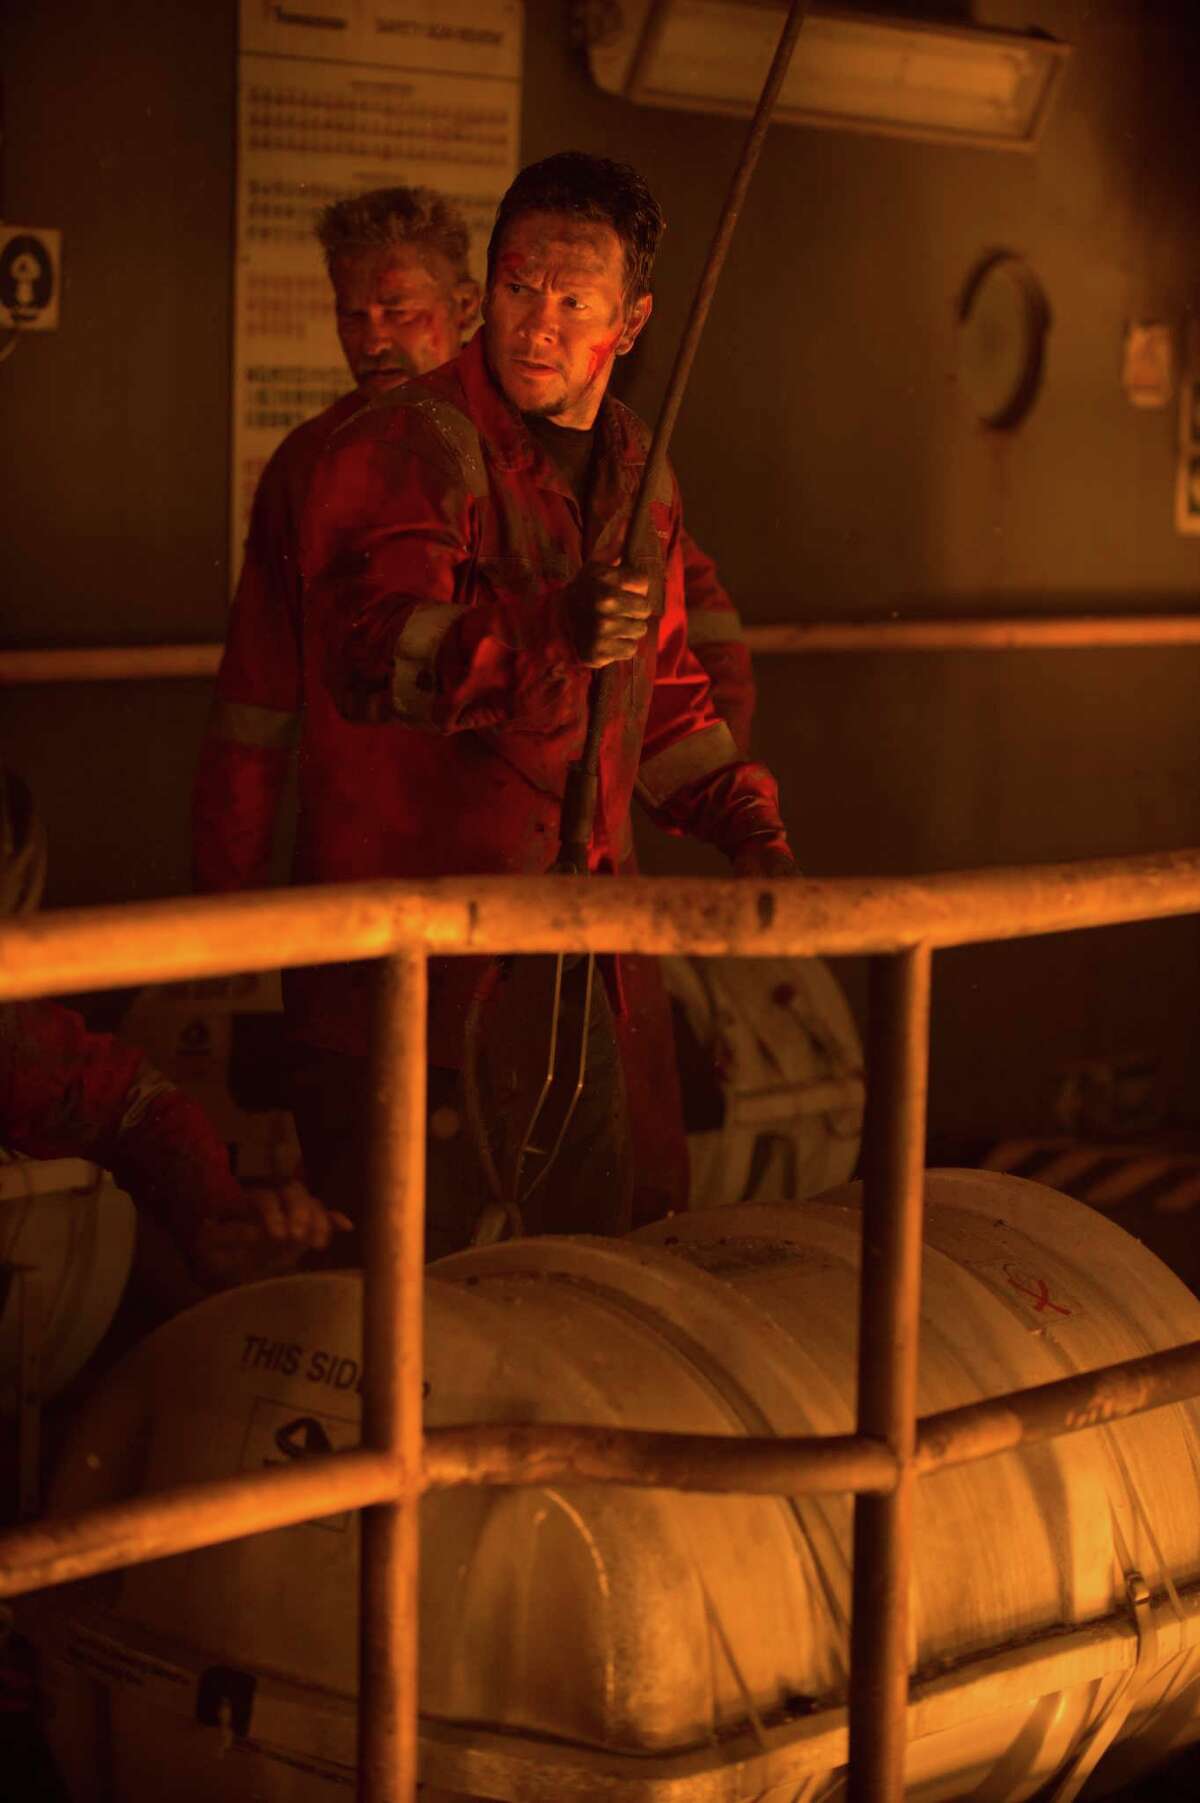 Jimmy Harrell, played by Kurt Russell, and Mike Williams, played by Mark Wahlberg, were both on board the Deepwater Horizon when the rig burst into flames.